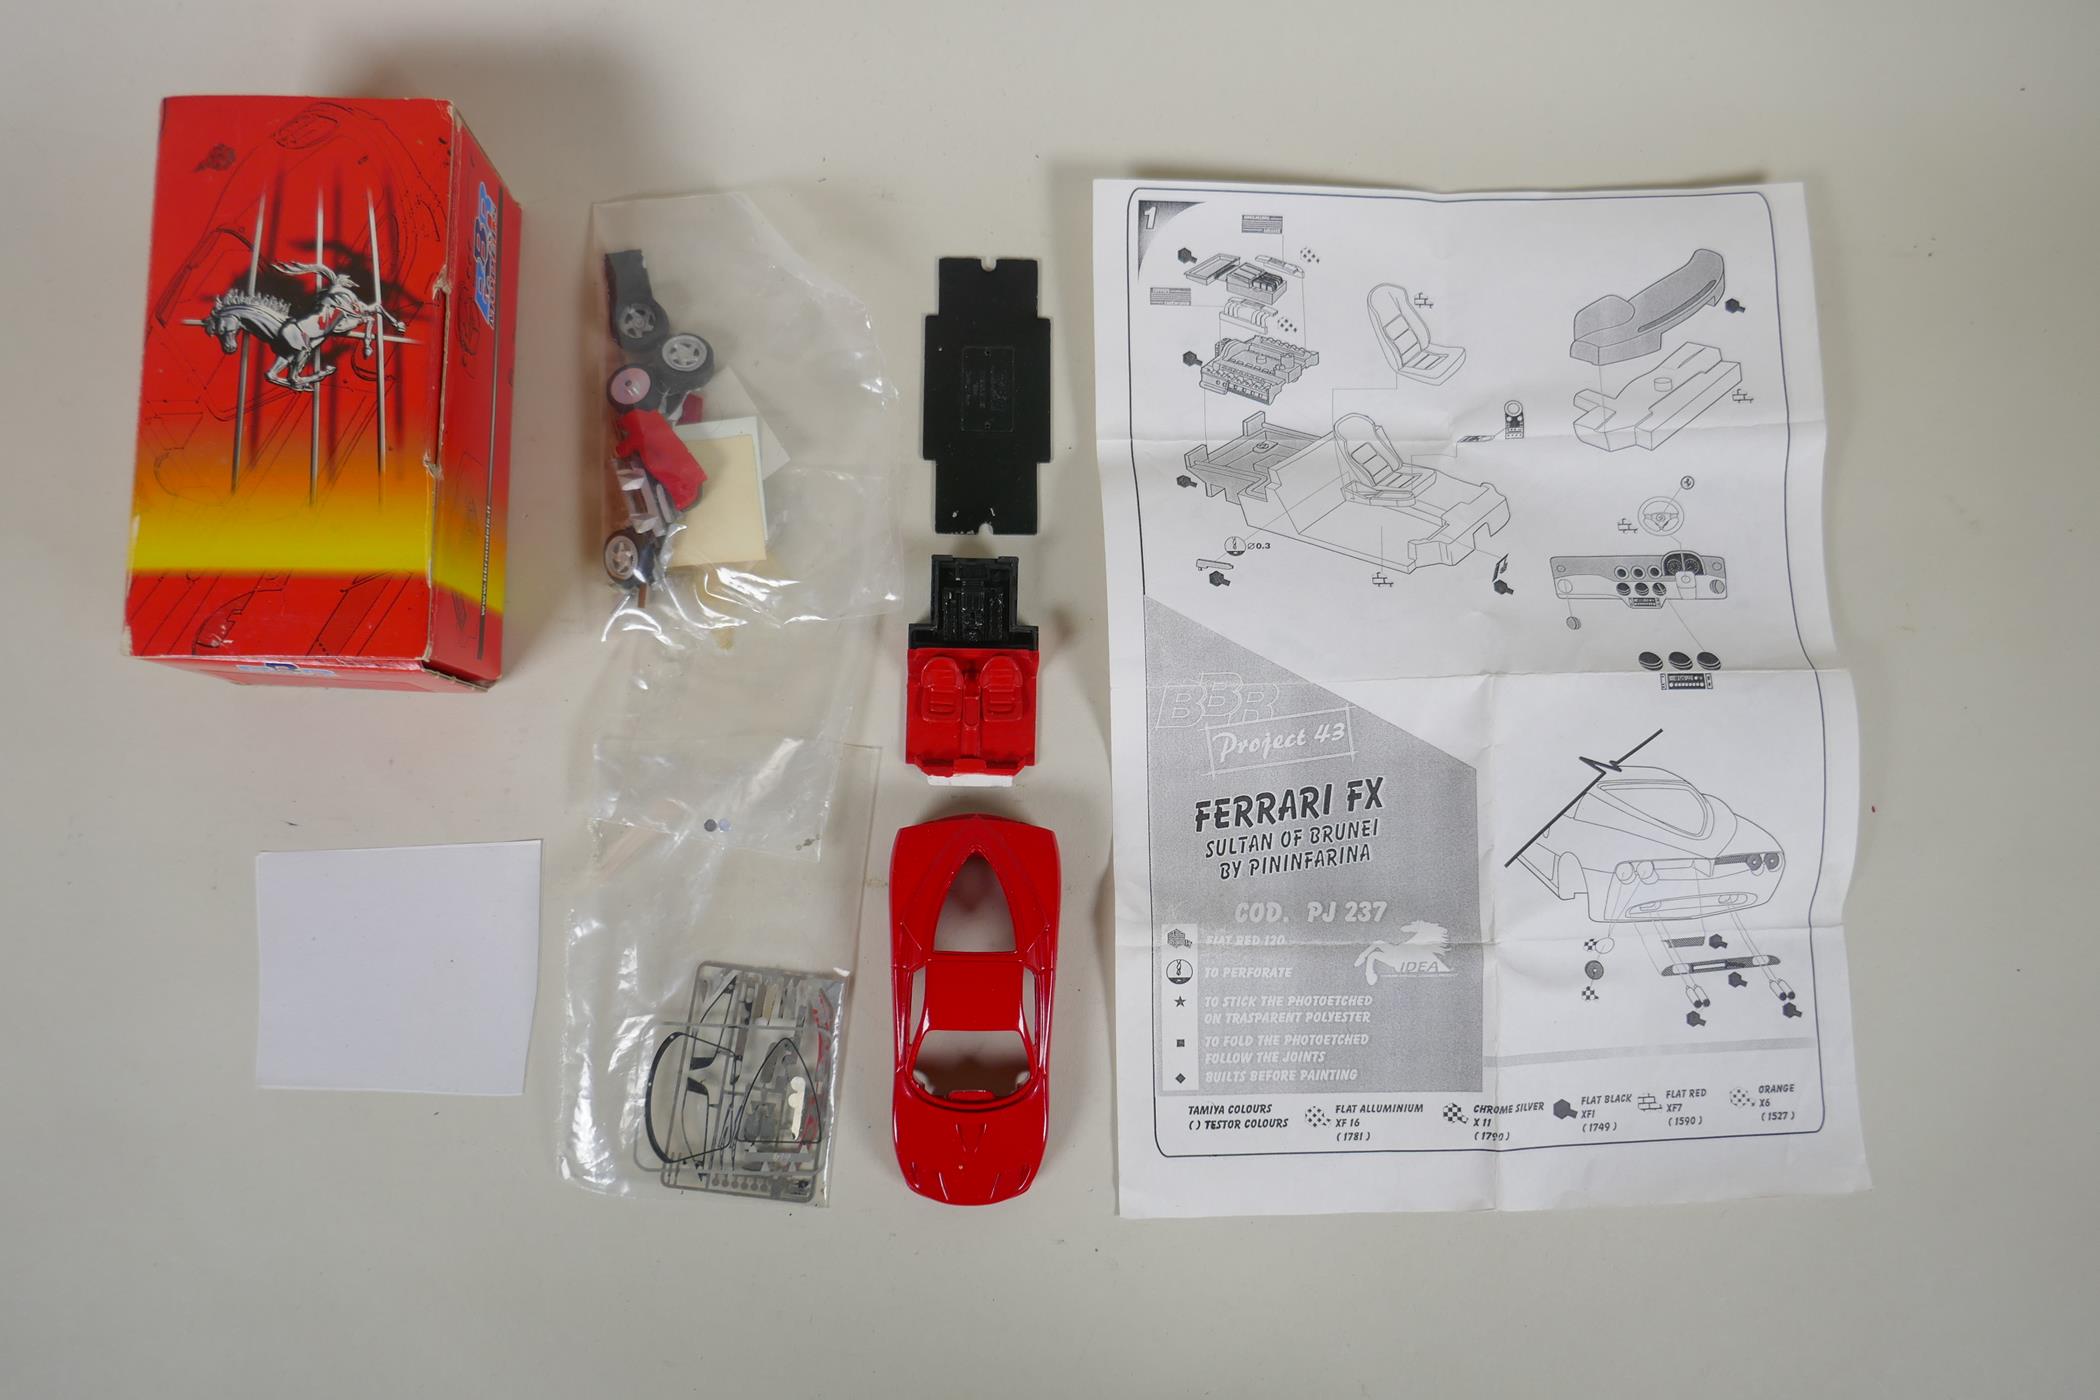 Eleven unassembled 1:43 scale resin and metal model car kits, to include BBR - Ferrari FX Sultan - Image 4 of 4